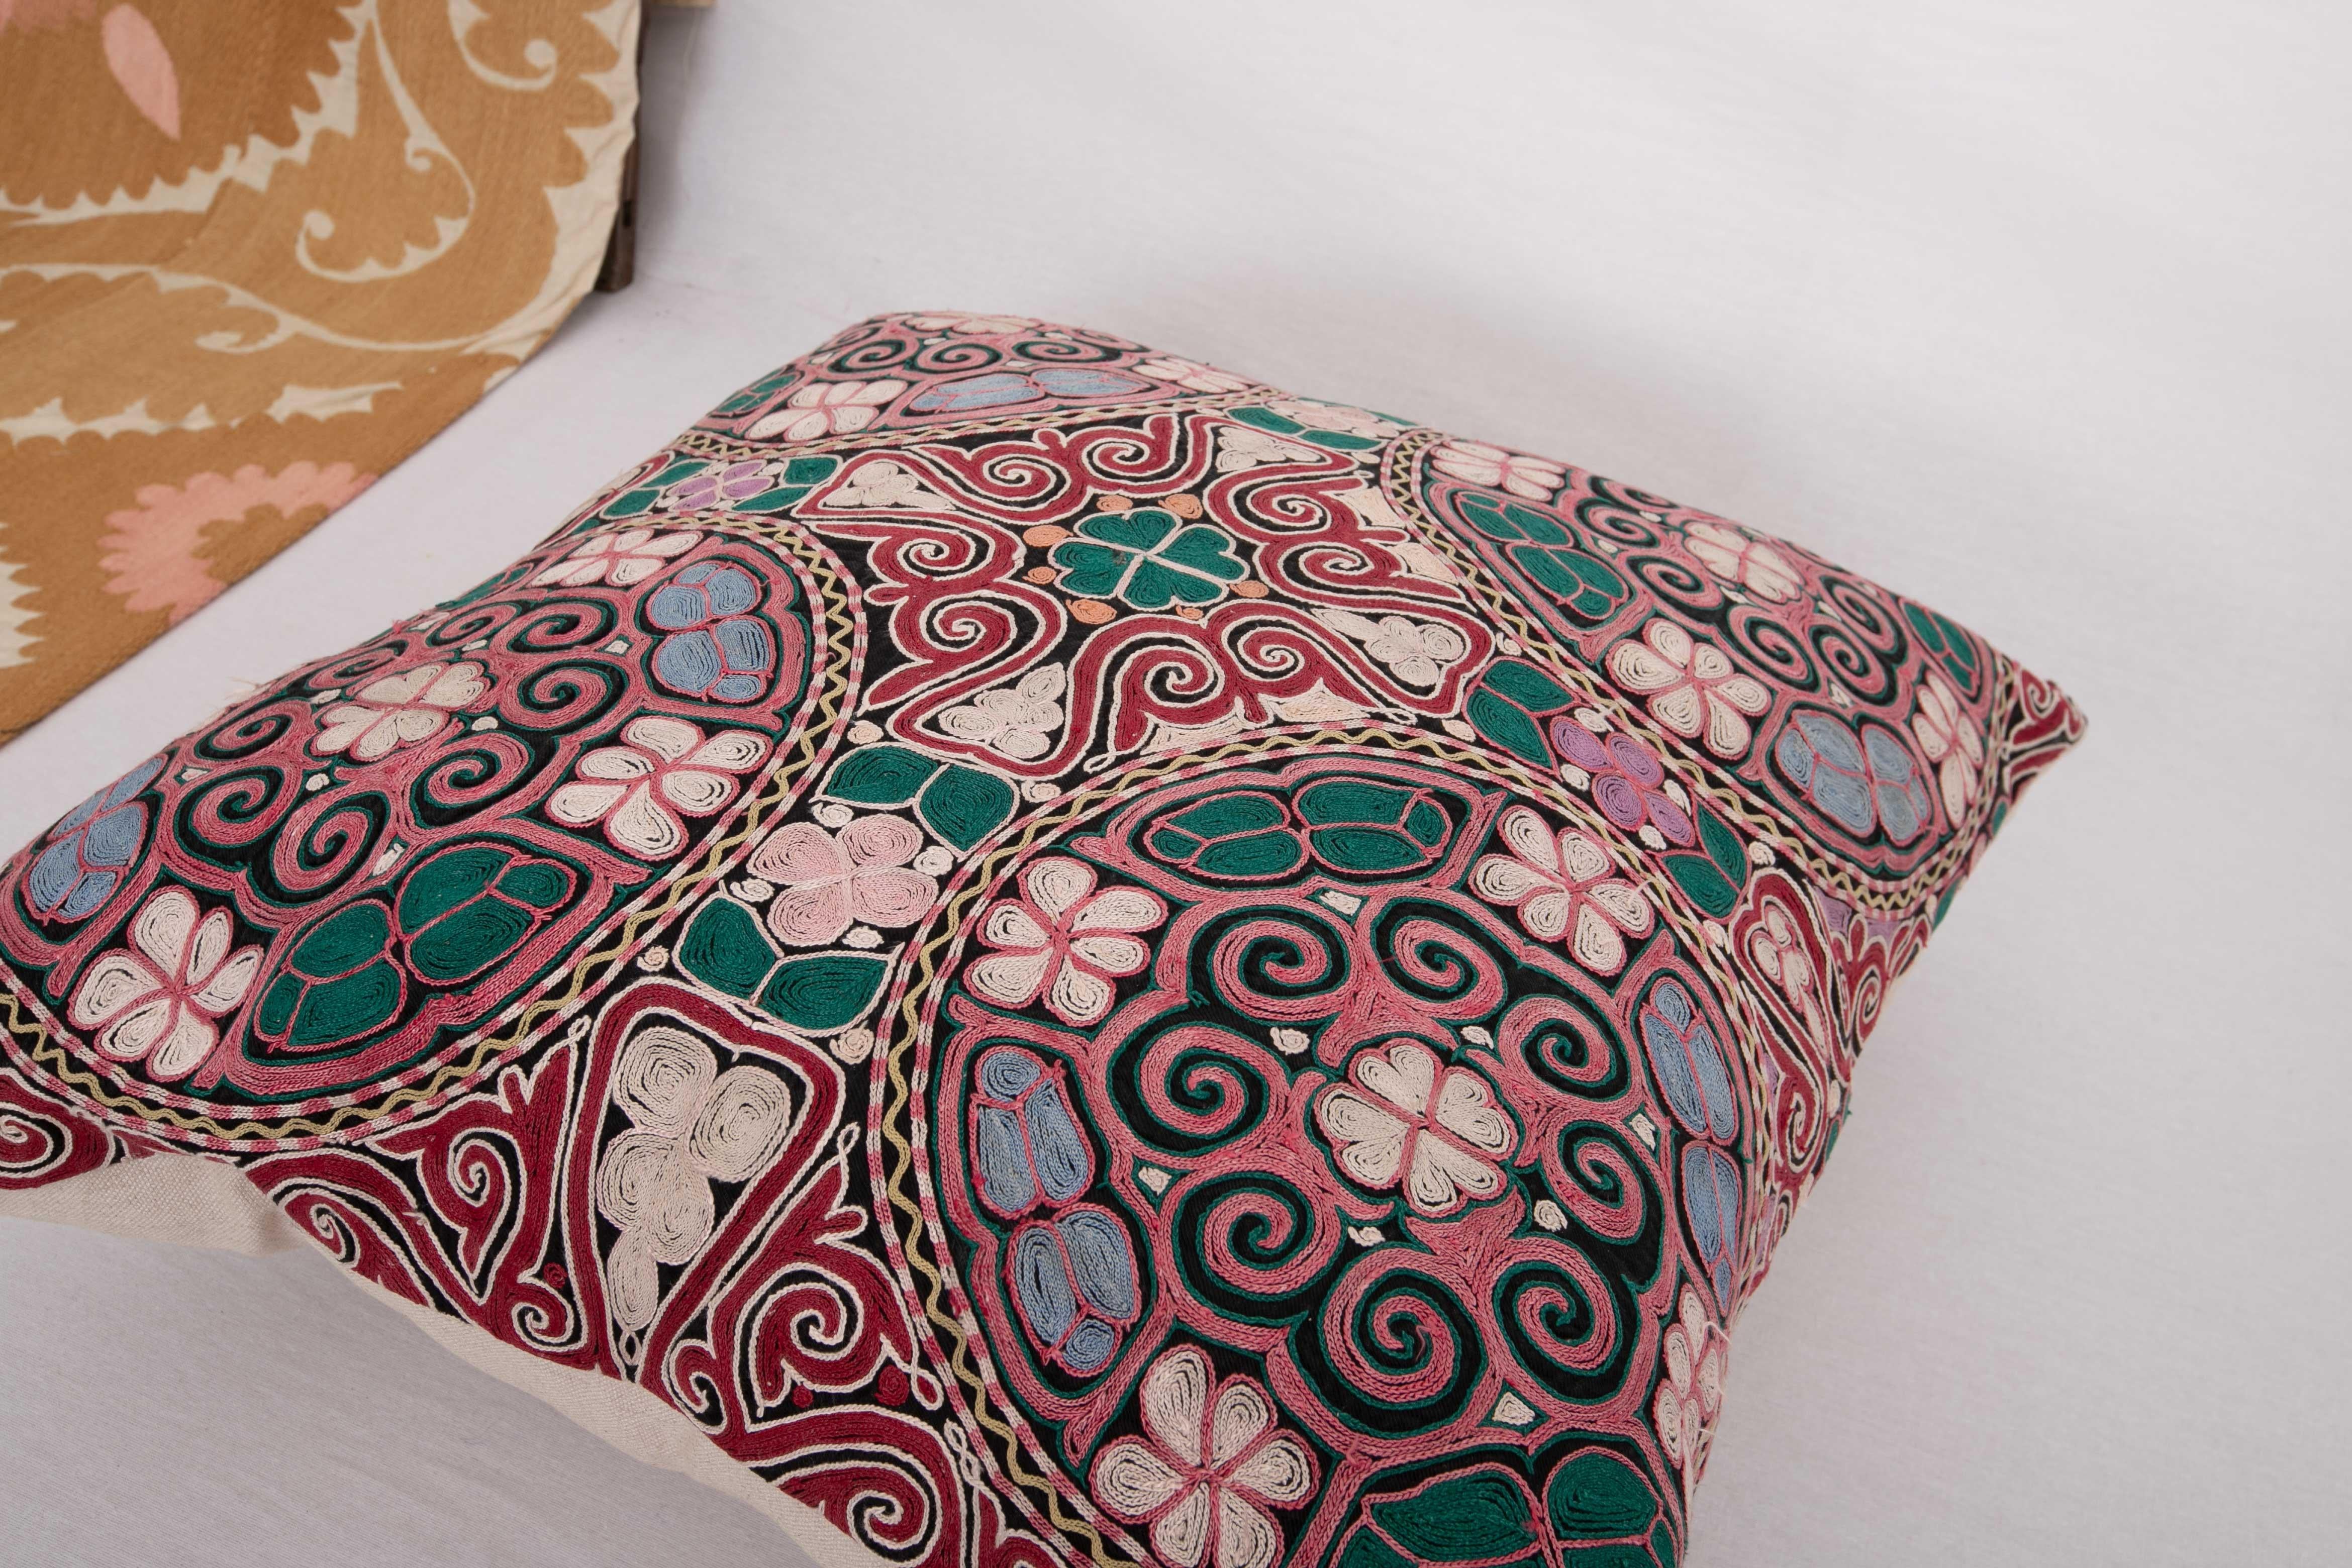 20th Century Pillowcase made from a mid 20th. C. Kazakh / Kyrgyz Embroidery For Sale